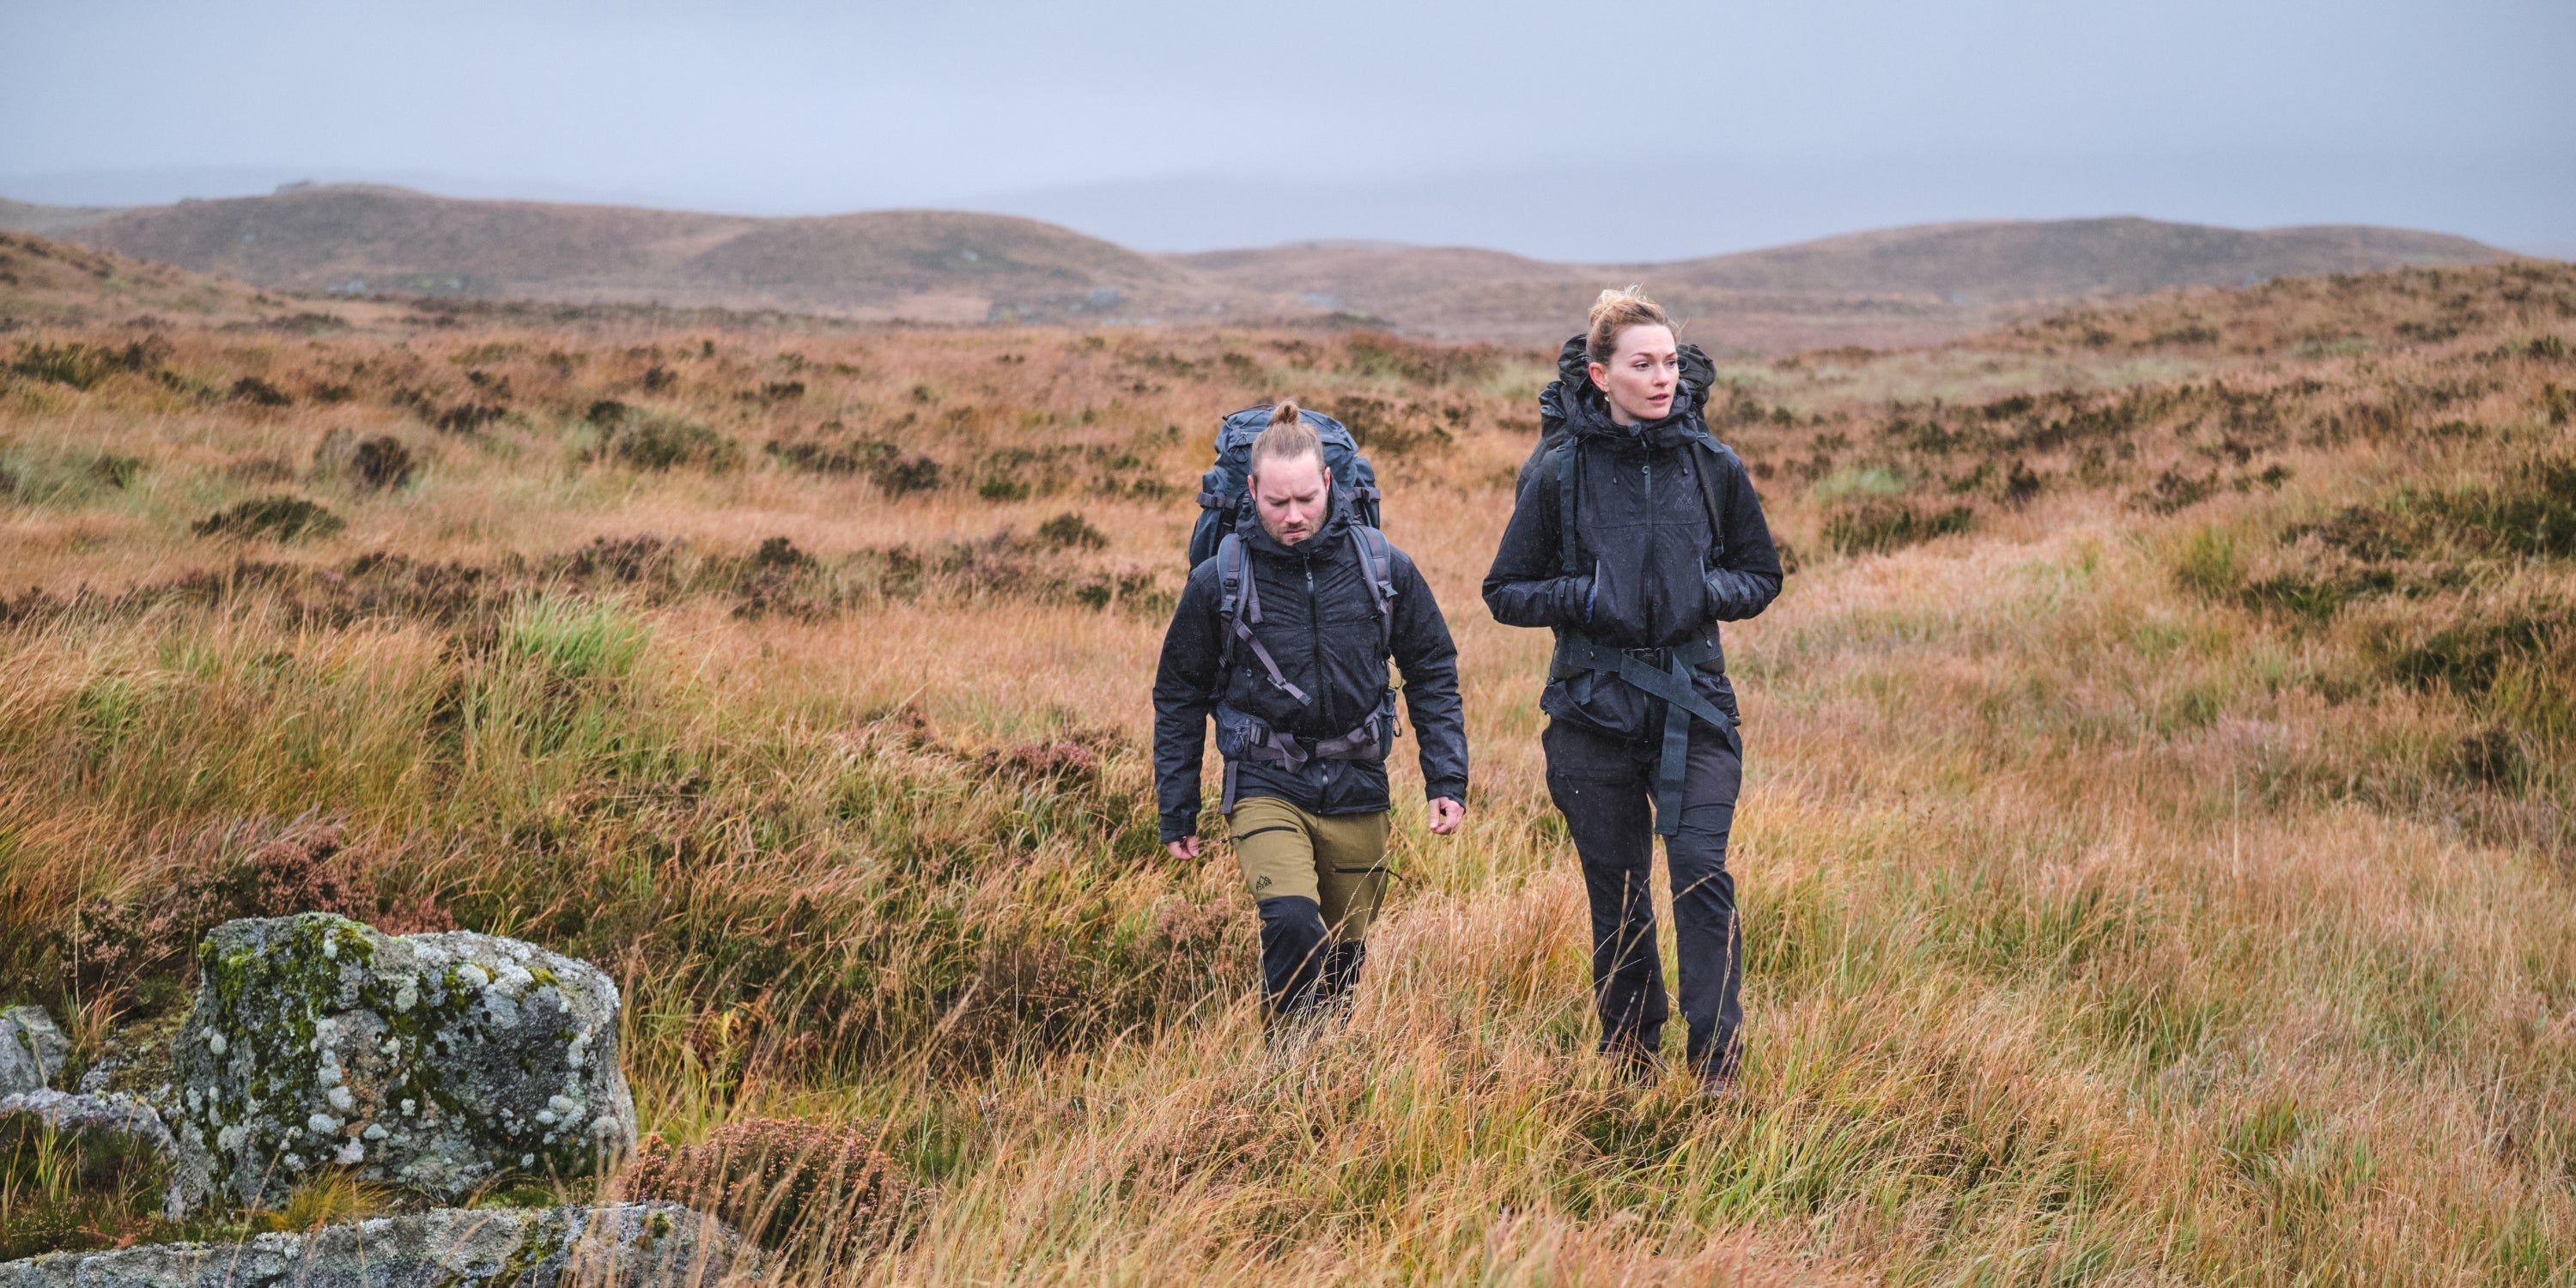 Fjern Jackets in 'Stealth' colourway being put to the test on a rainy Highland moor